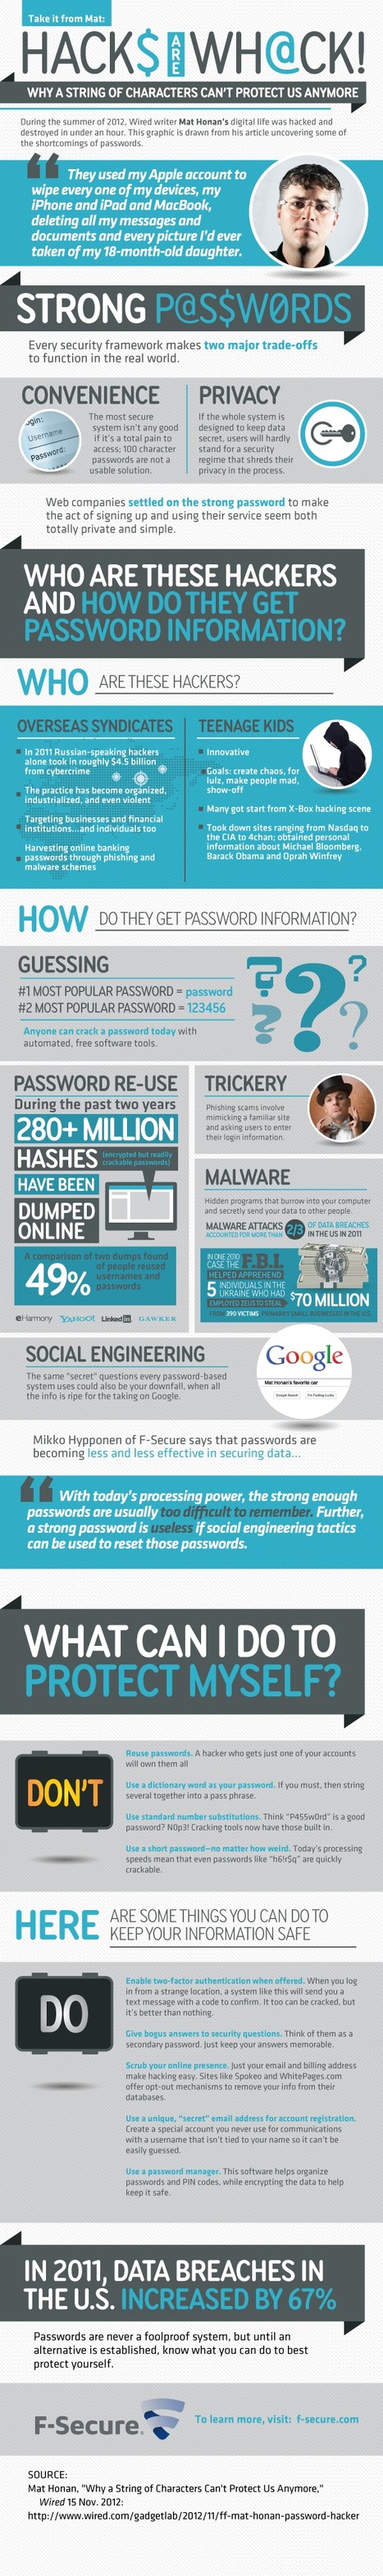 Hacking lessons learned: how to cover your digital ass [Infographic] | Latest Social Media News | Scoop.it